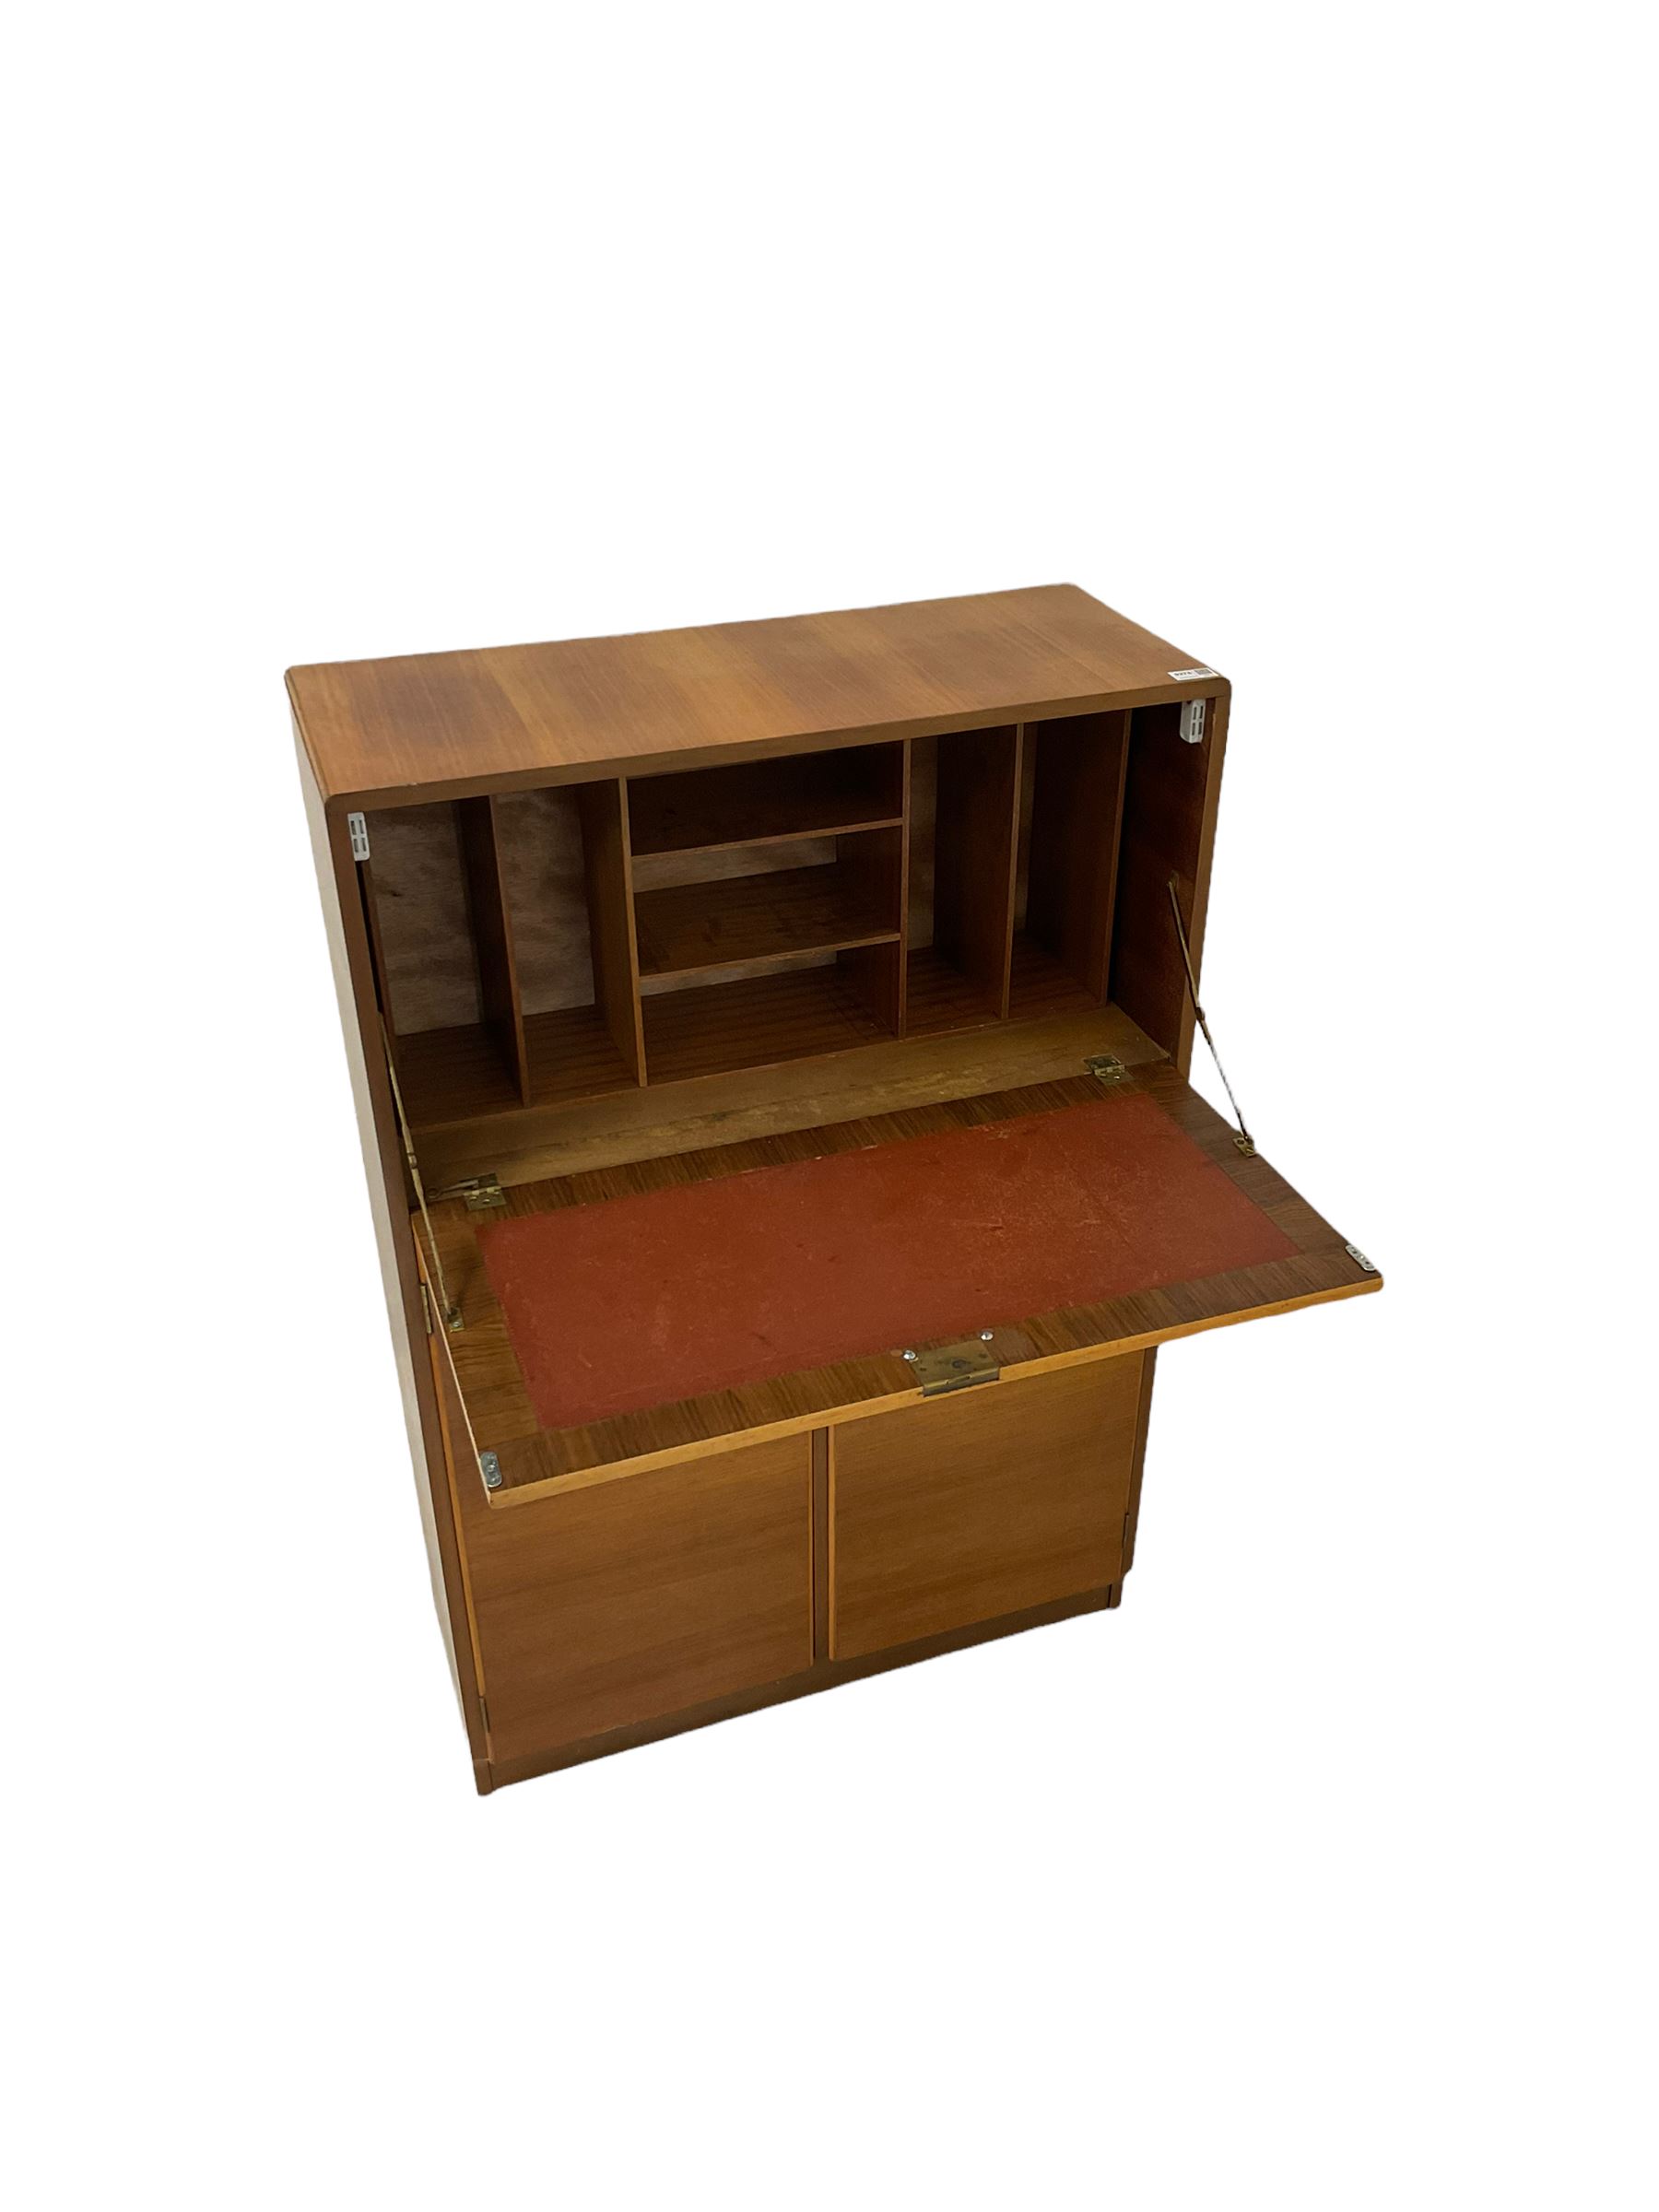 Teak chest with one fall front drawer over two cupboards - Image 3 of 4